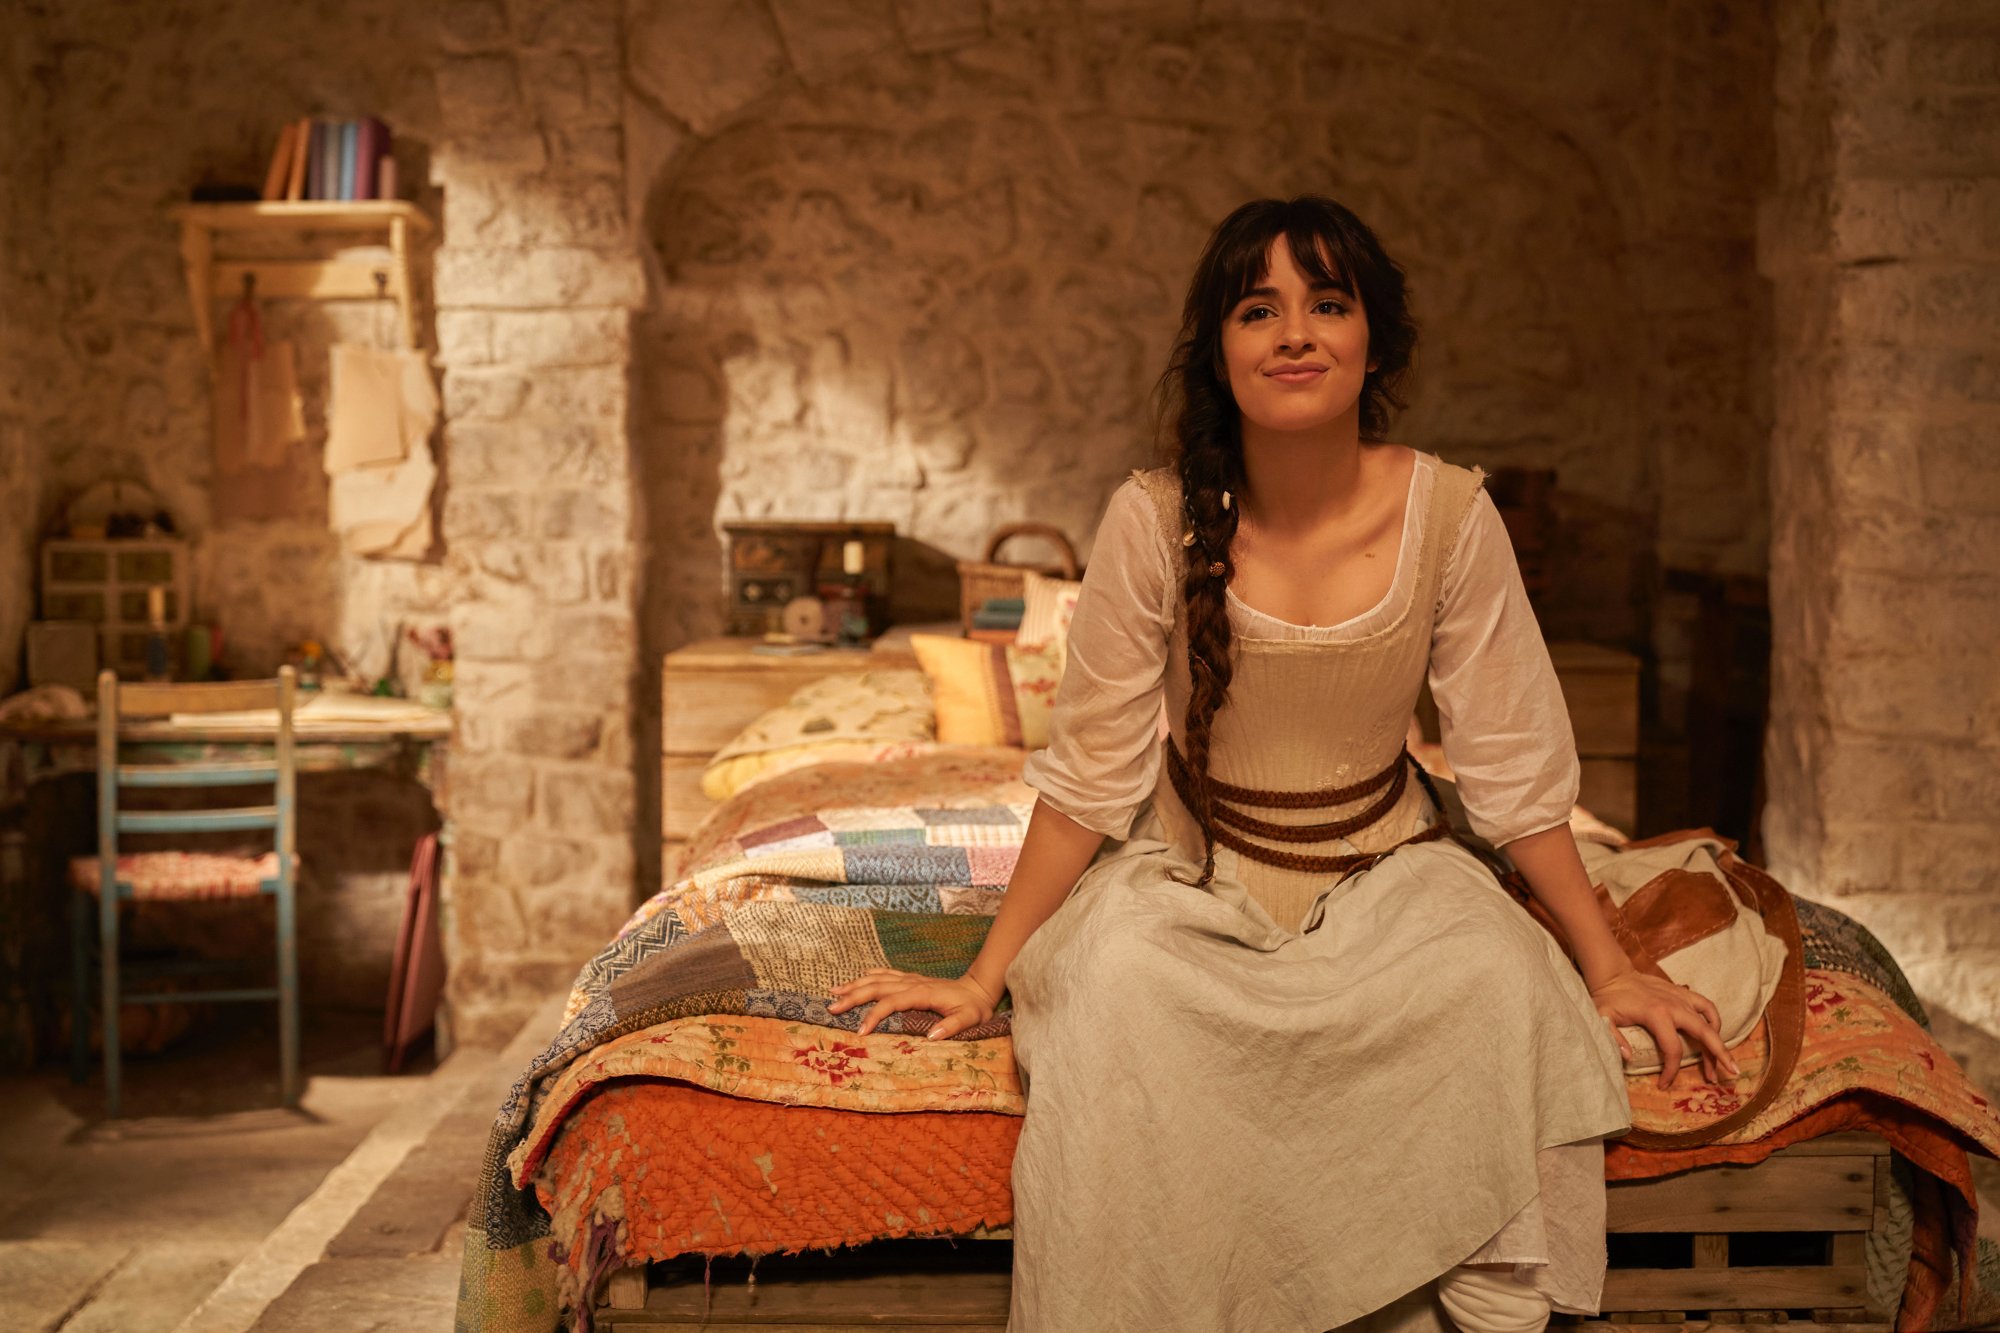 'Cinderella' star Camila Cabello as Cinderella in article about Oscars 2022 Fan Favorite smiling sitting on the bed